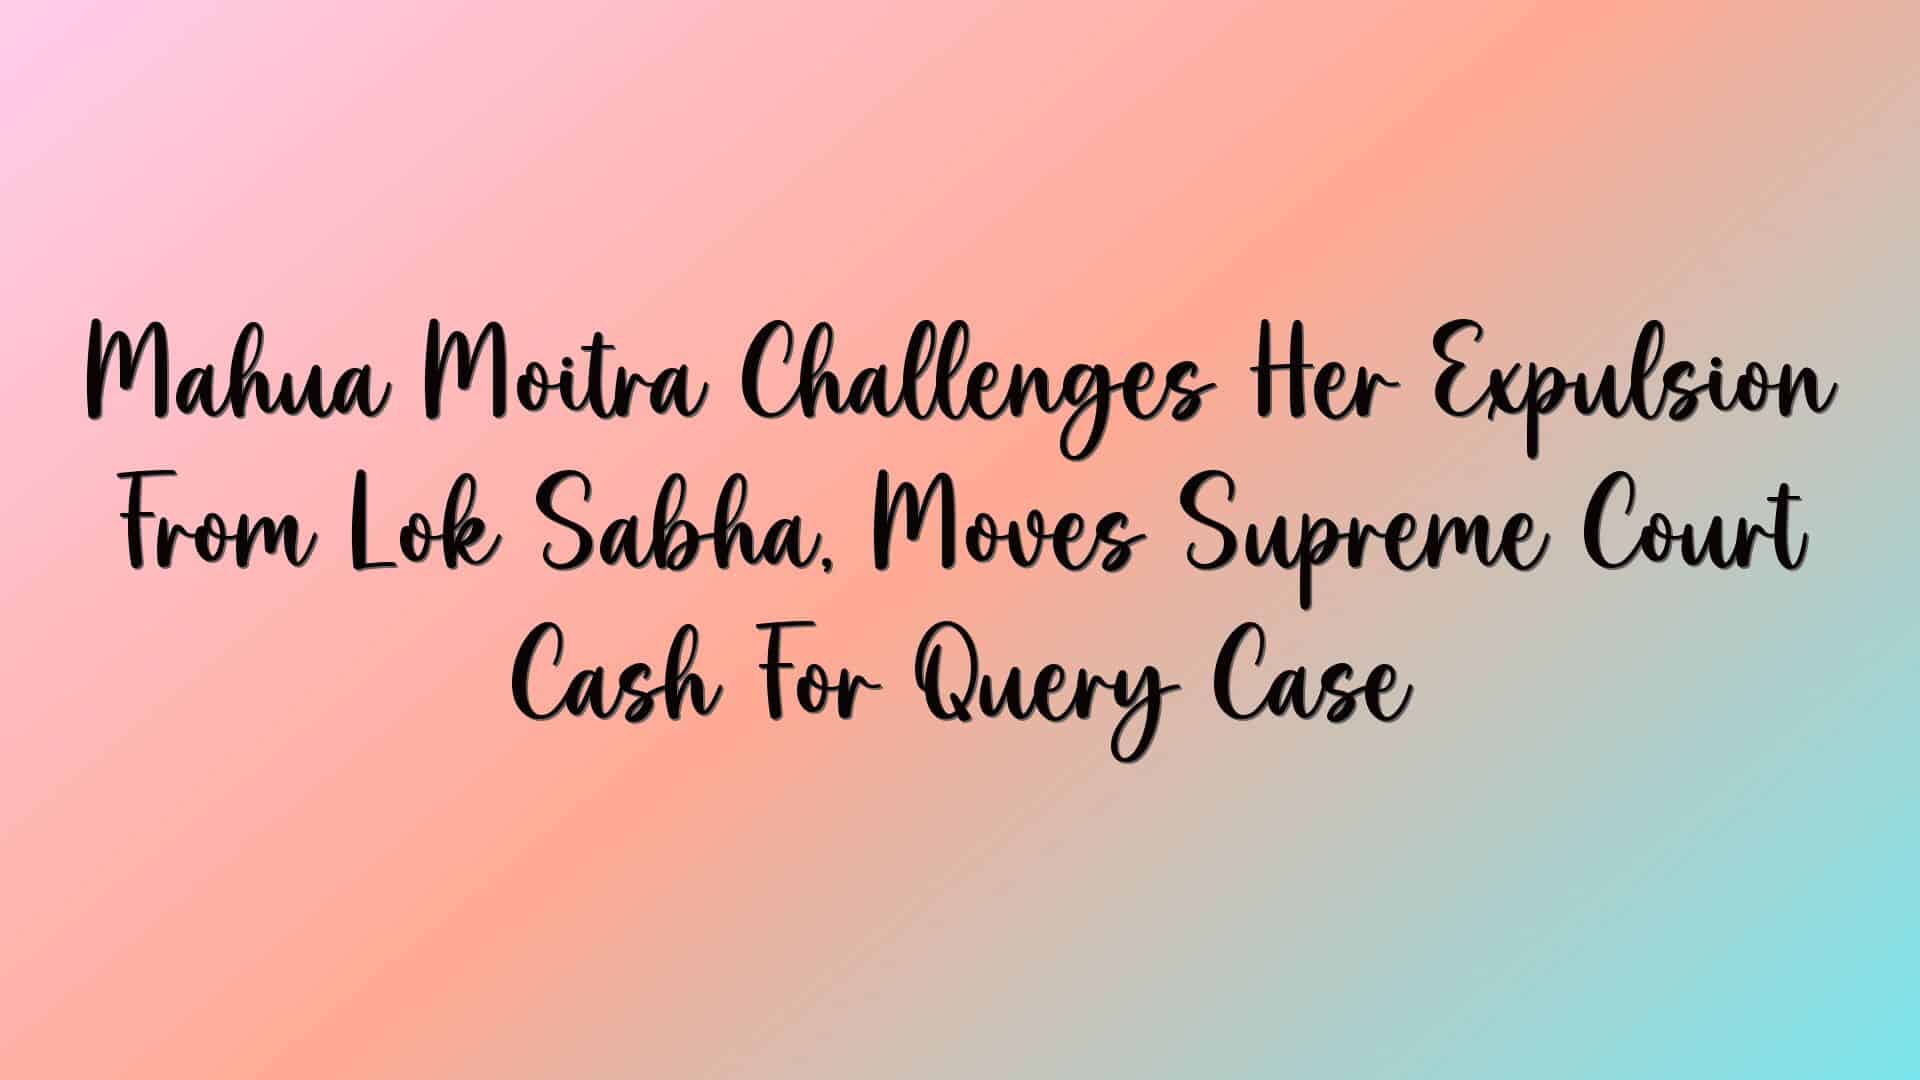 Mahua Moitra Challenges Her Expulsion From Lok Sabha, Moves Supreme Court Cash For Query Case